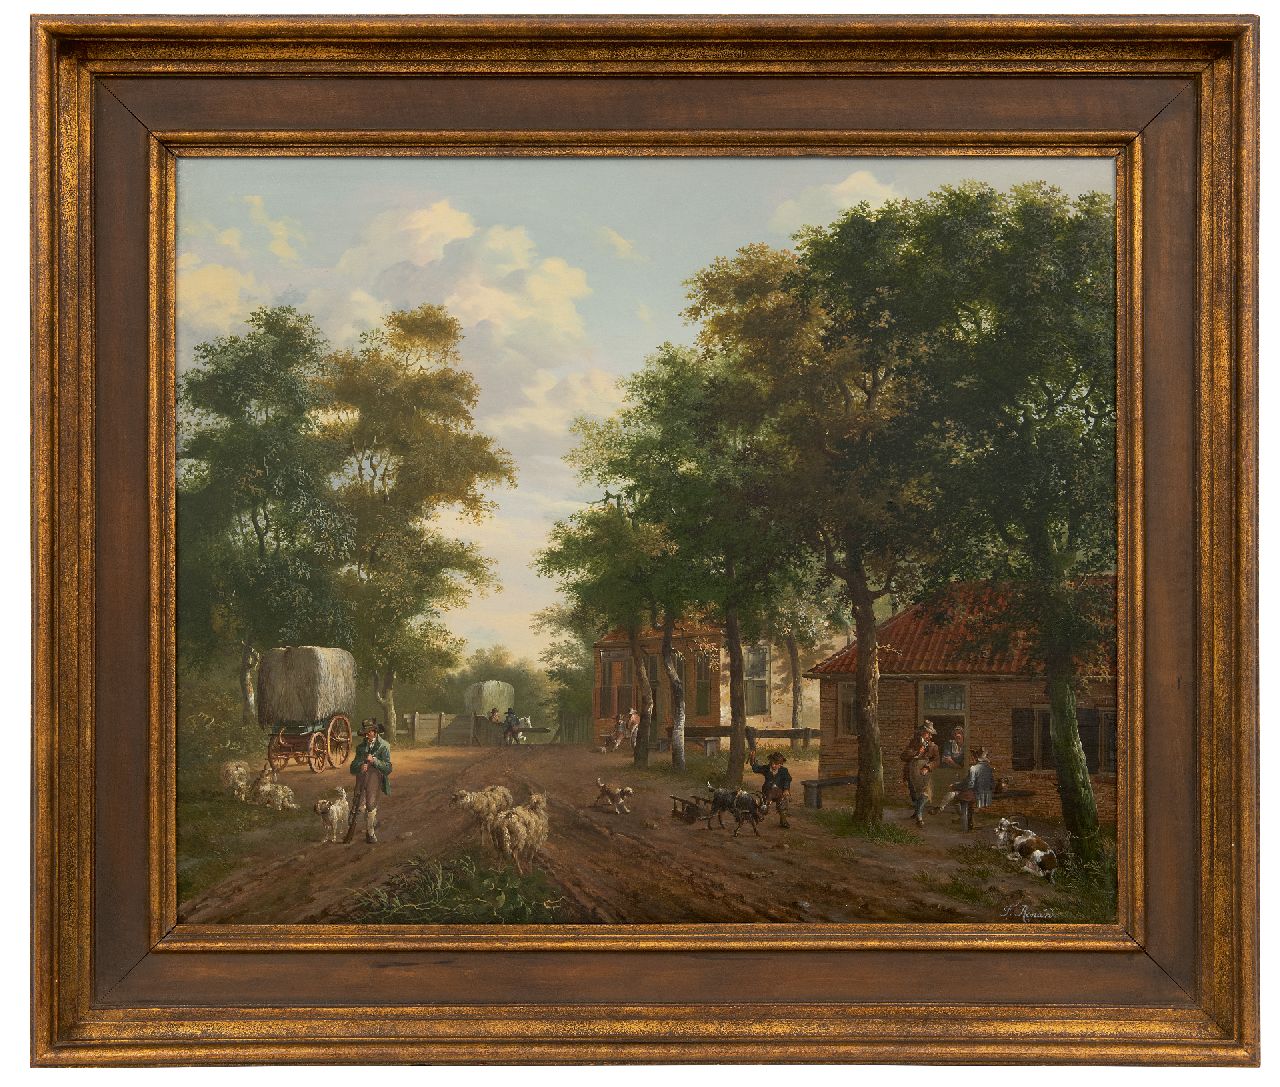 Renard F.T.  | Fredericus Theodorus Renard | Paintings offered for sale | Rural activities in a village, oil on panel 52.1 x 63.4 cm, signed l.r.